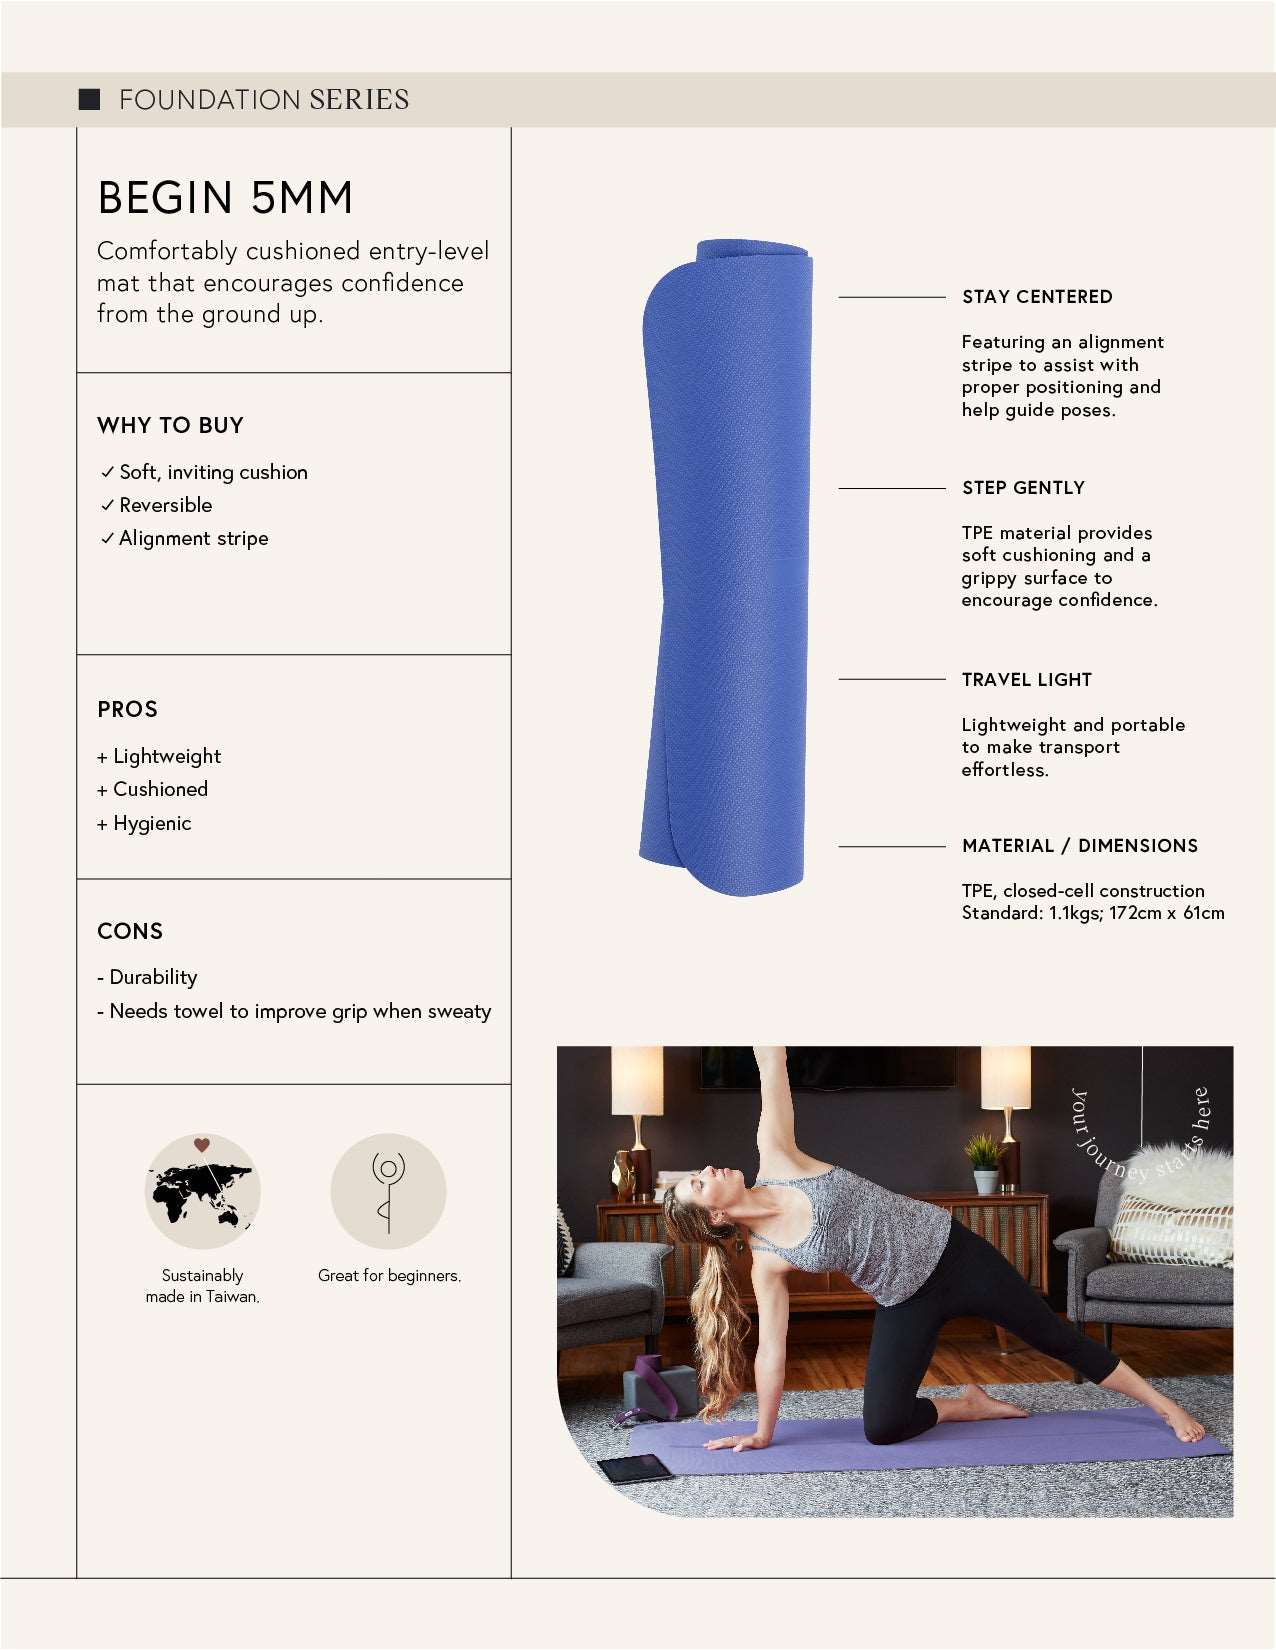 What Is The Ultimate Best Non-Slip Yoga Mat? Here Are My Top 3